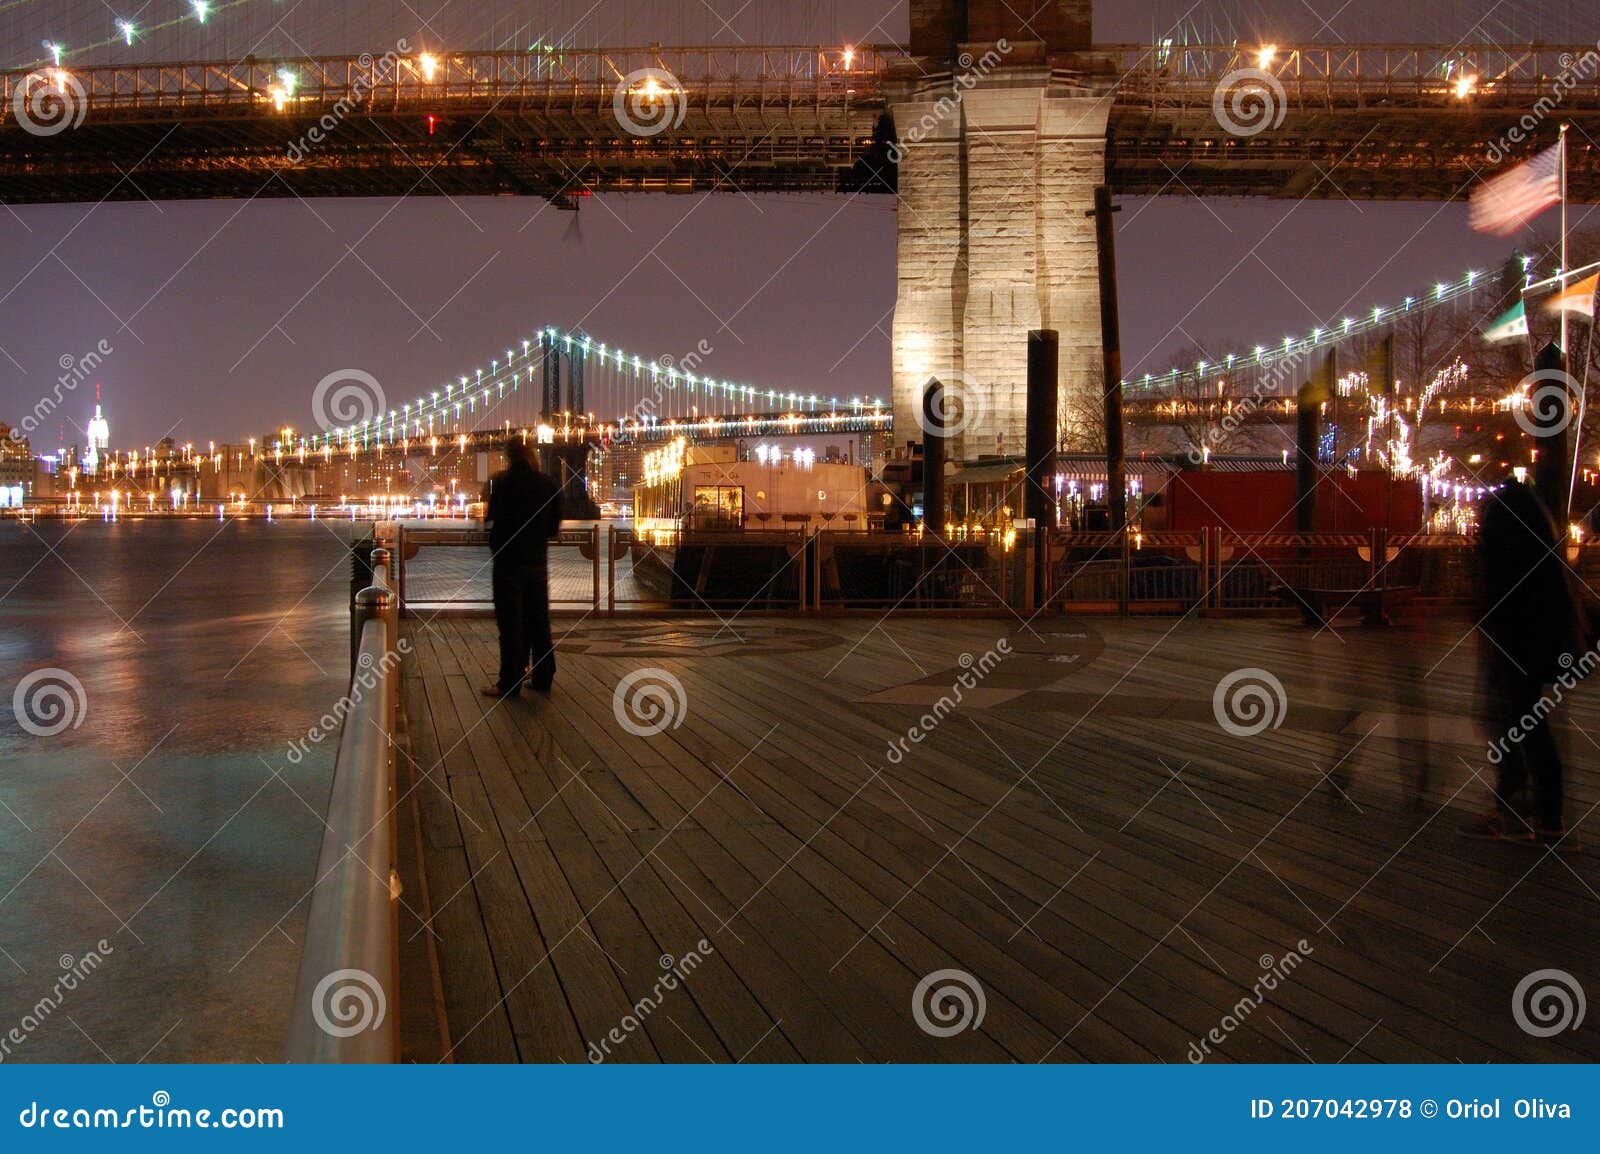 night view of the most emblematic buildings and skyscrapers of manhattan (new york). brooklyn bridge. river hudson.